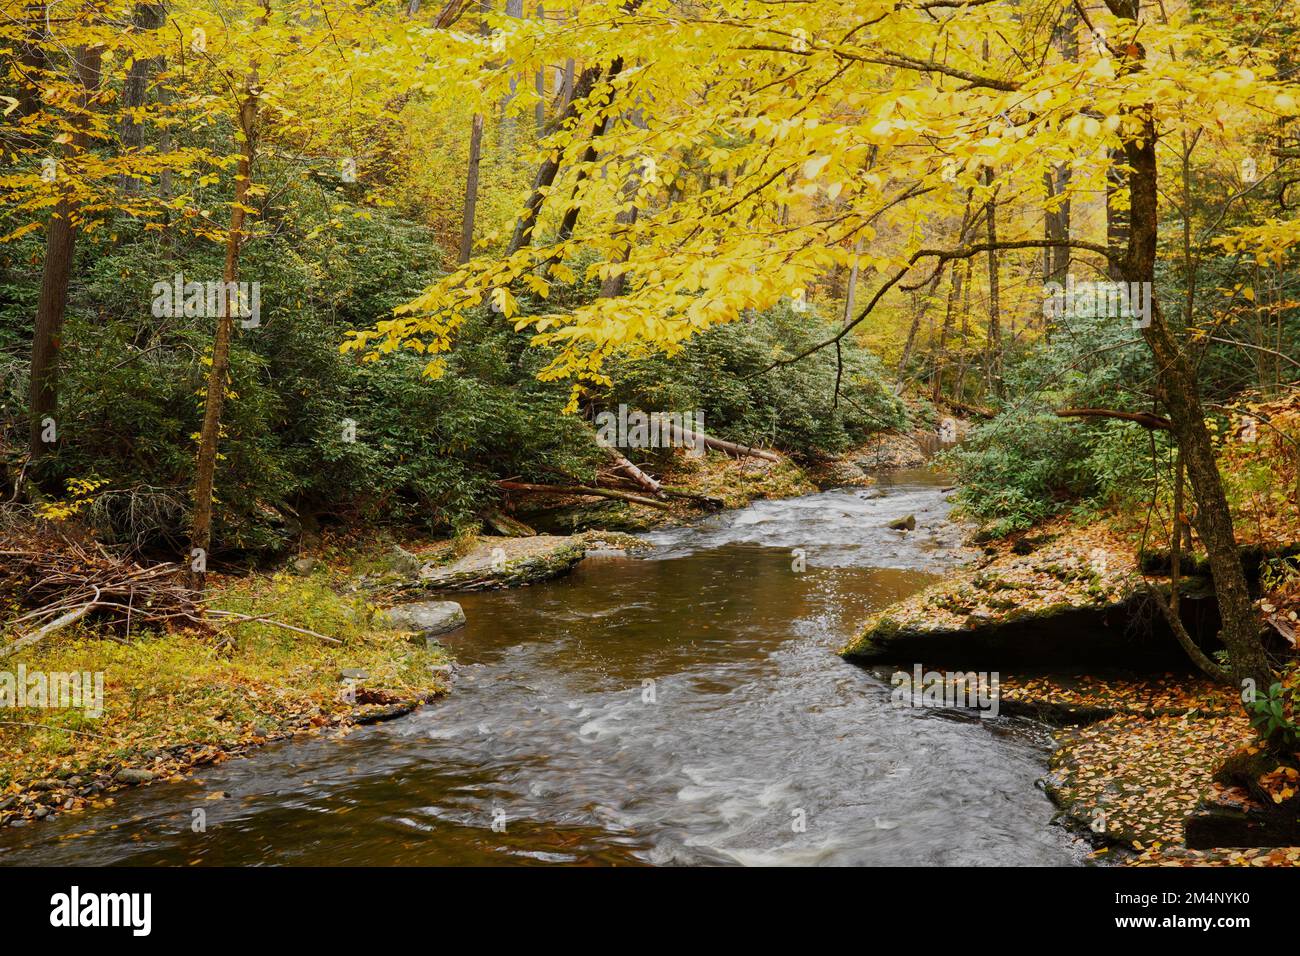 Dingmans Creek in the Poconos mountains flowing through the forest in Autumn Stock Photo